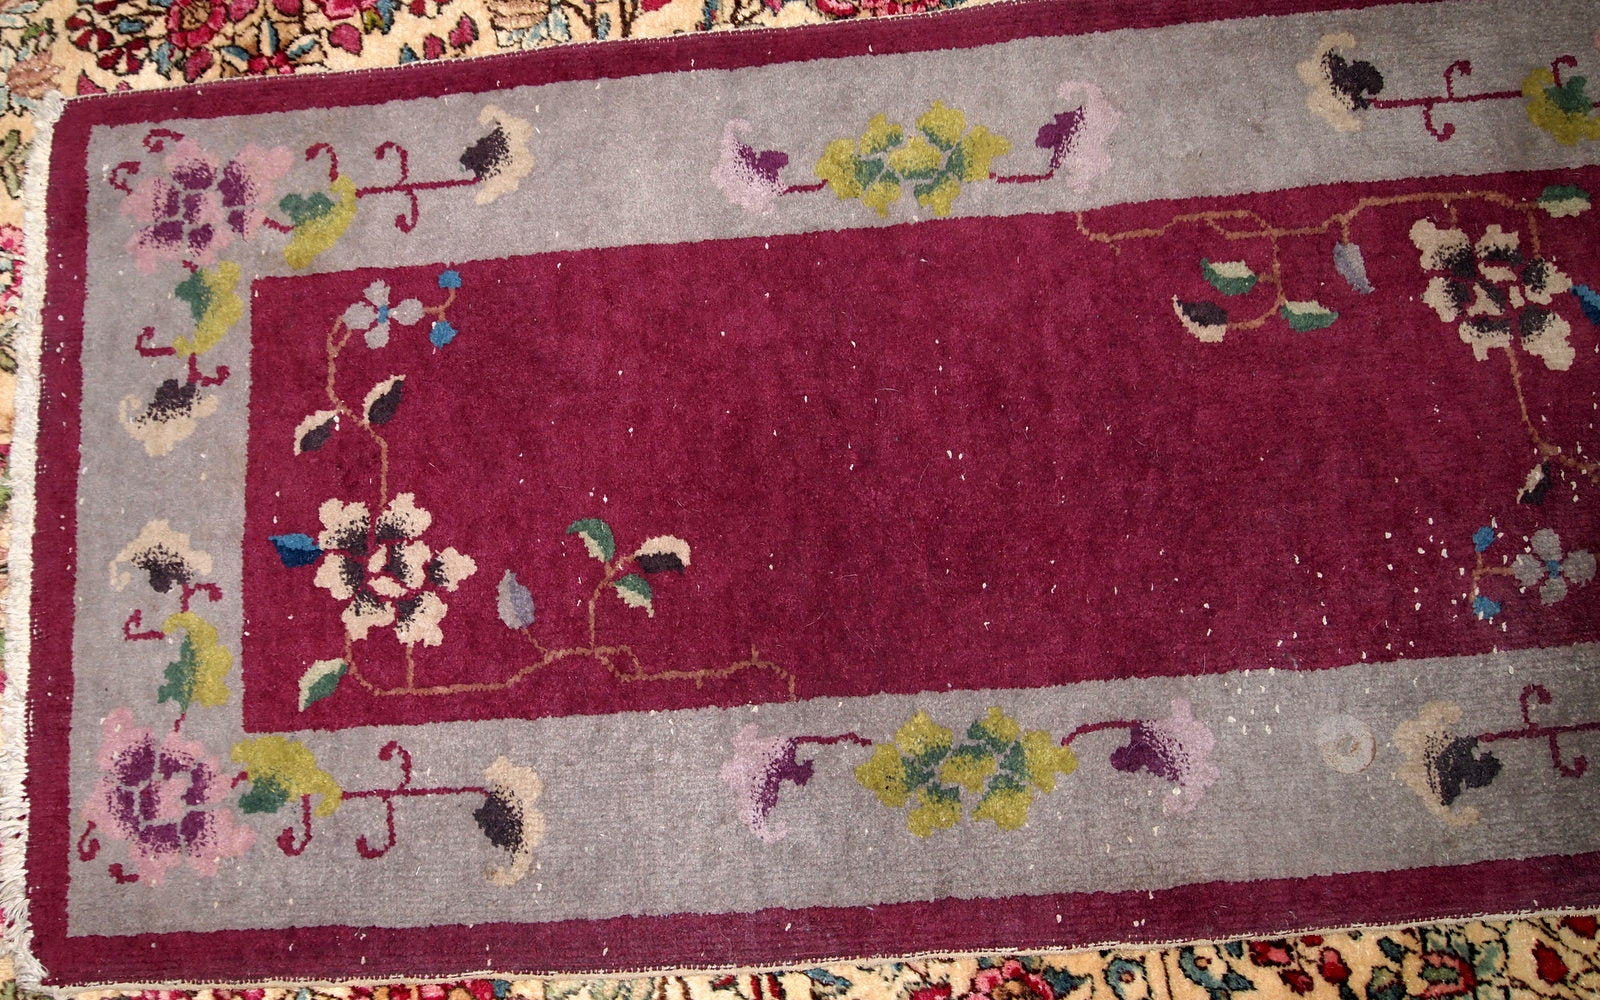 Antique Art Deco Chinese rug in Bordeaux and silver shades. The rug is from 1920s in original good condition.